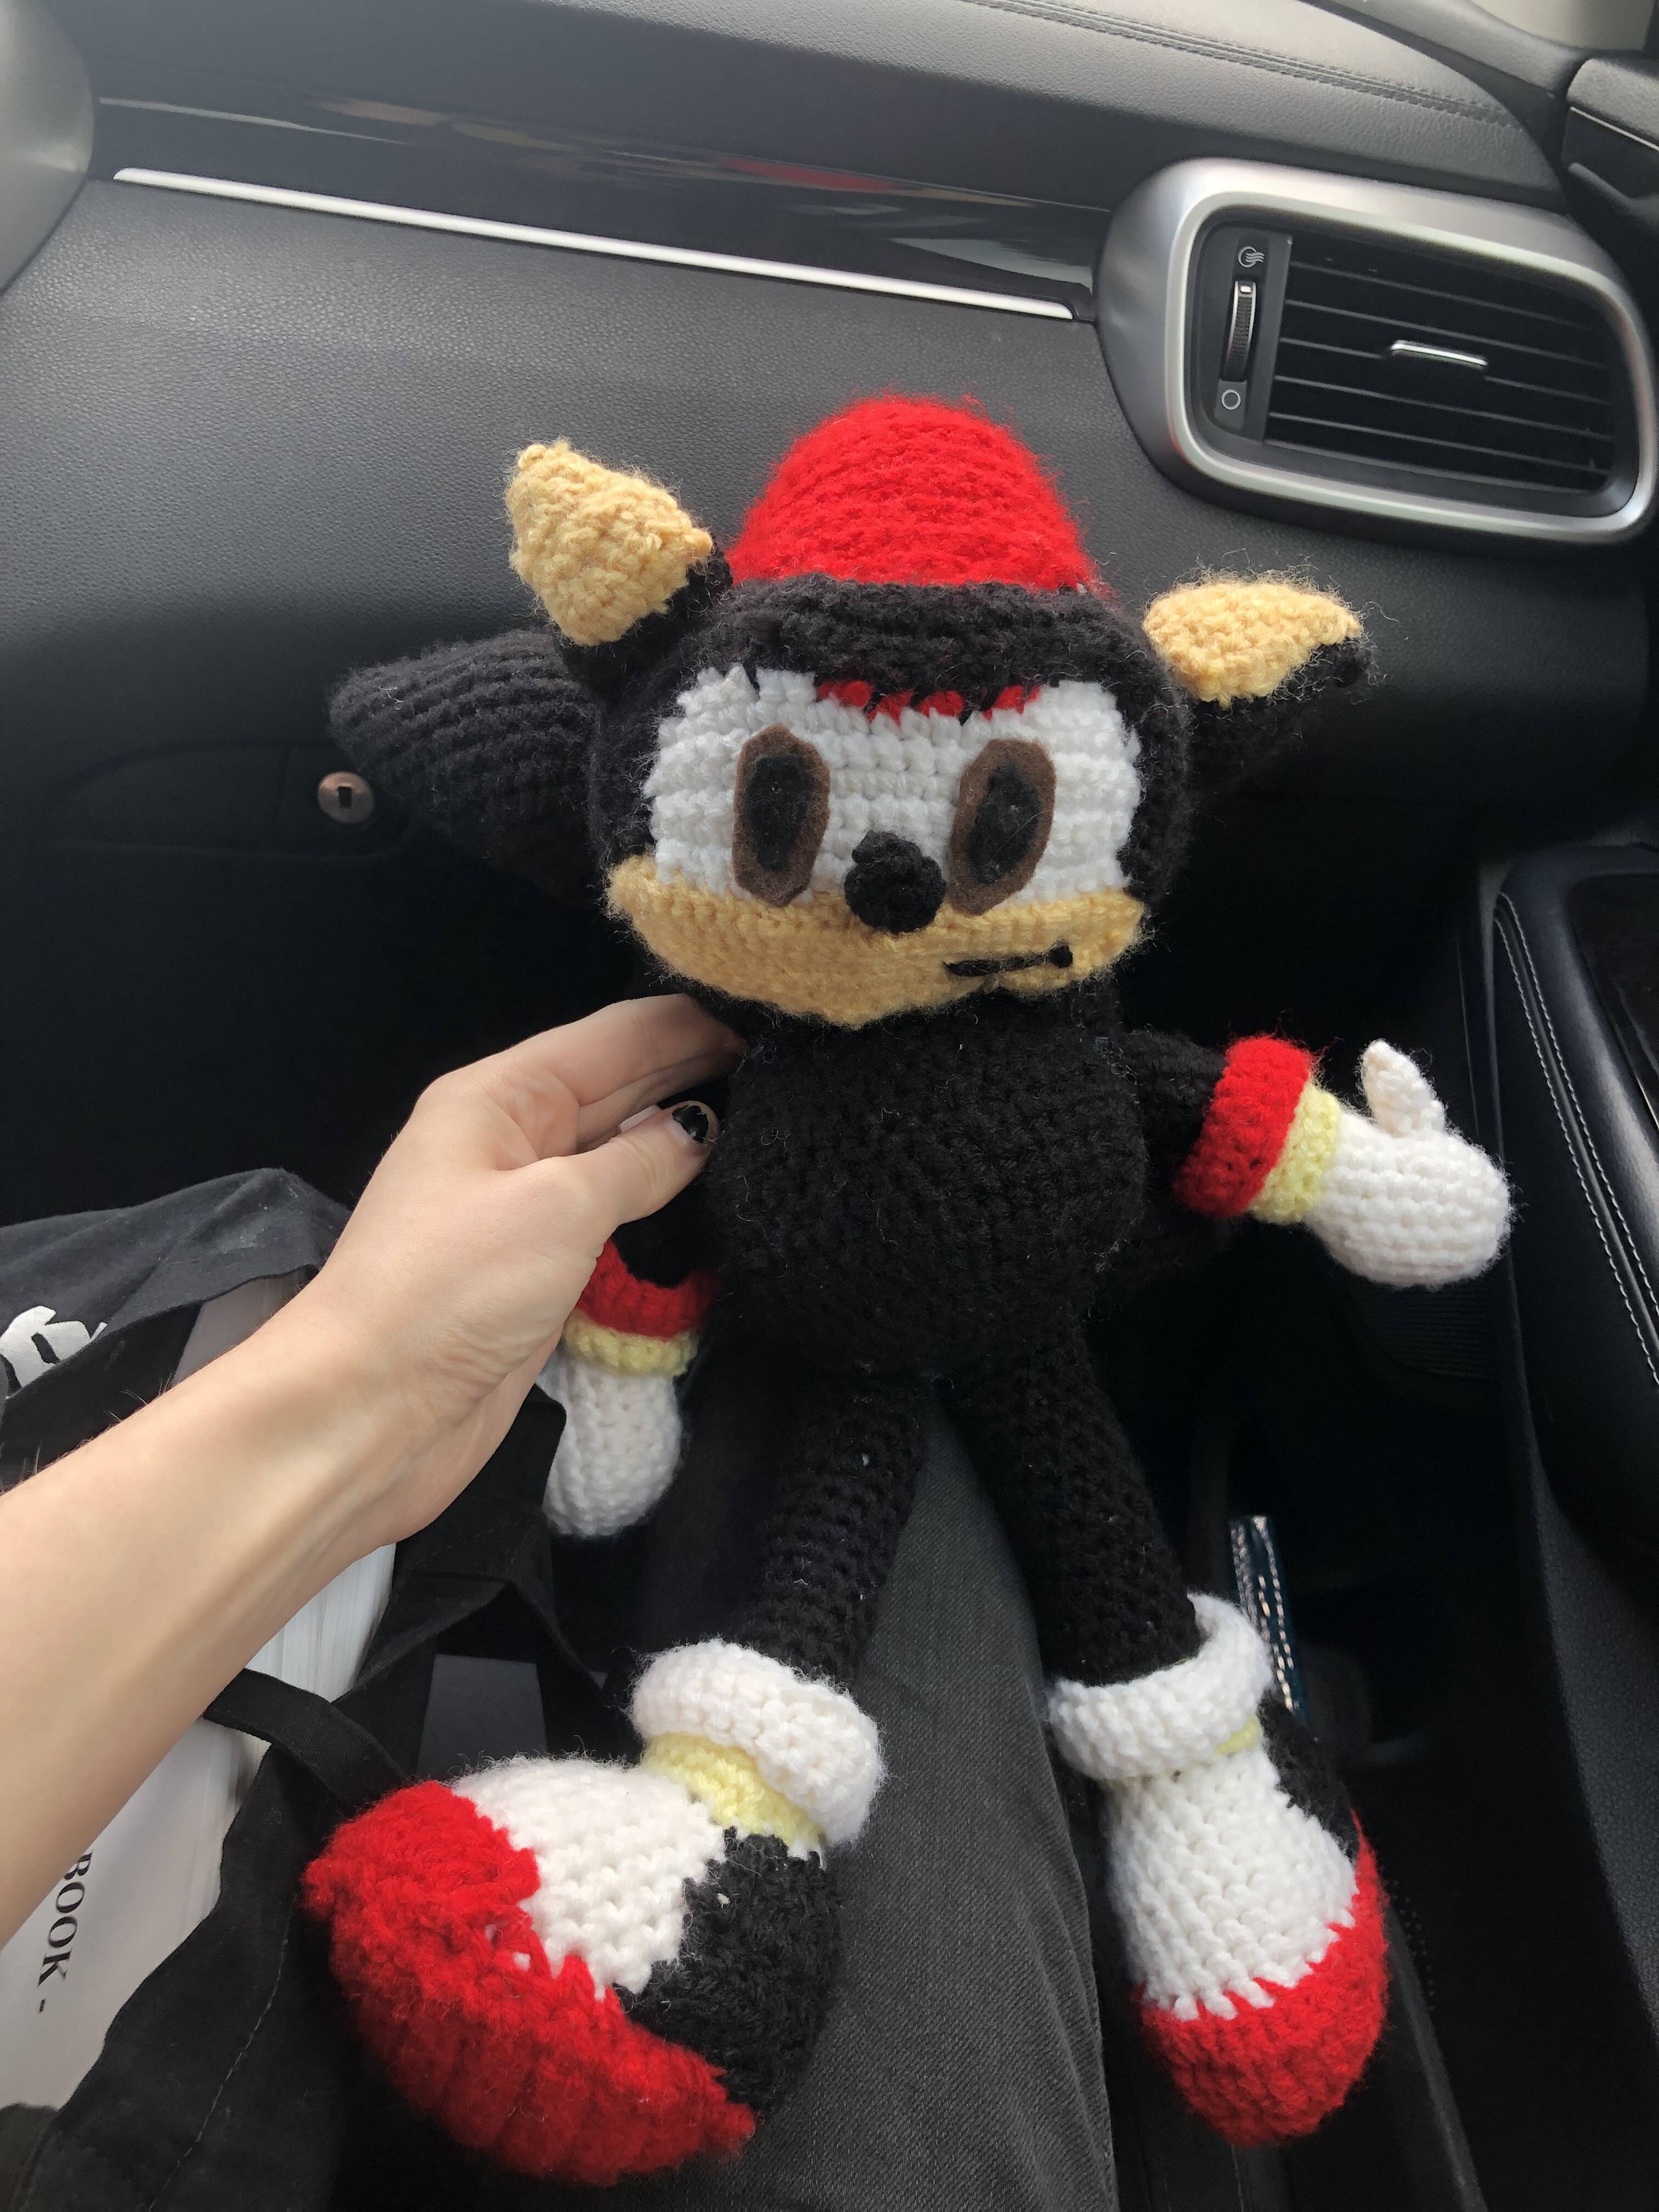 Shadow The Hedgehog I Crocheted For A